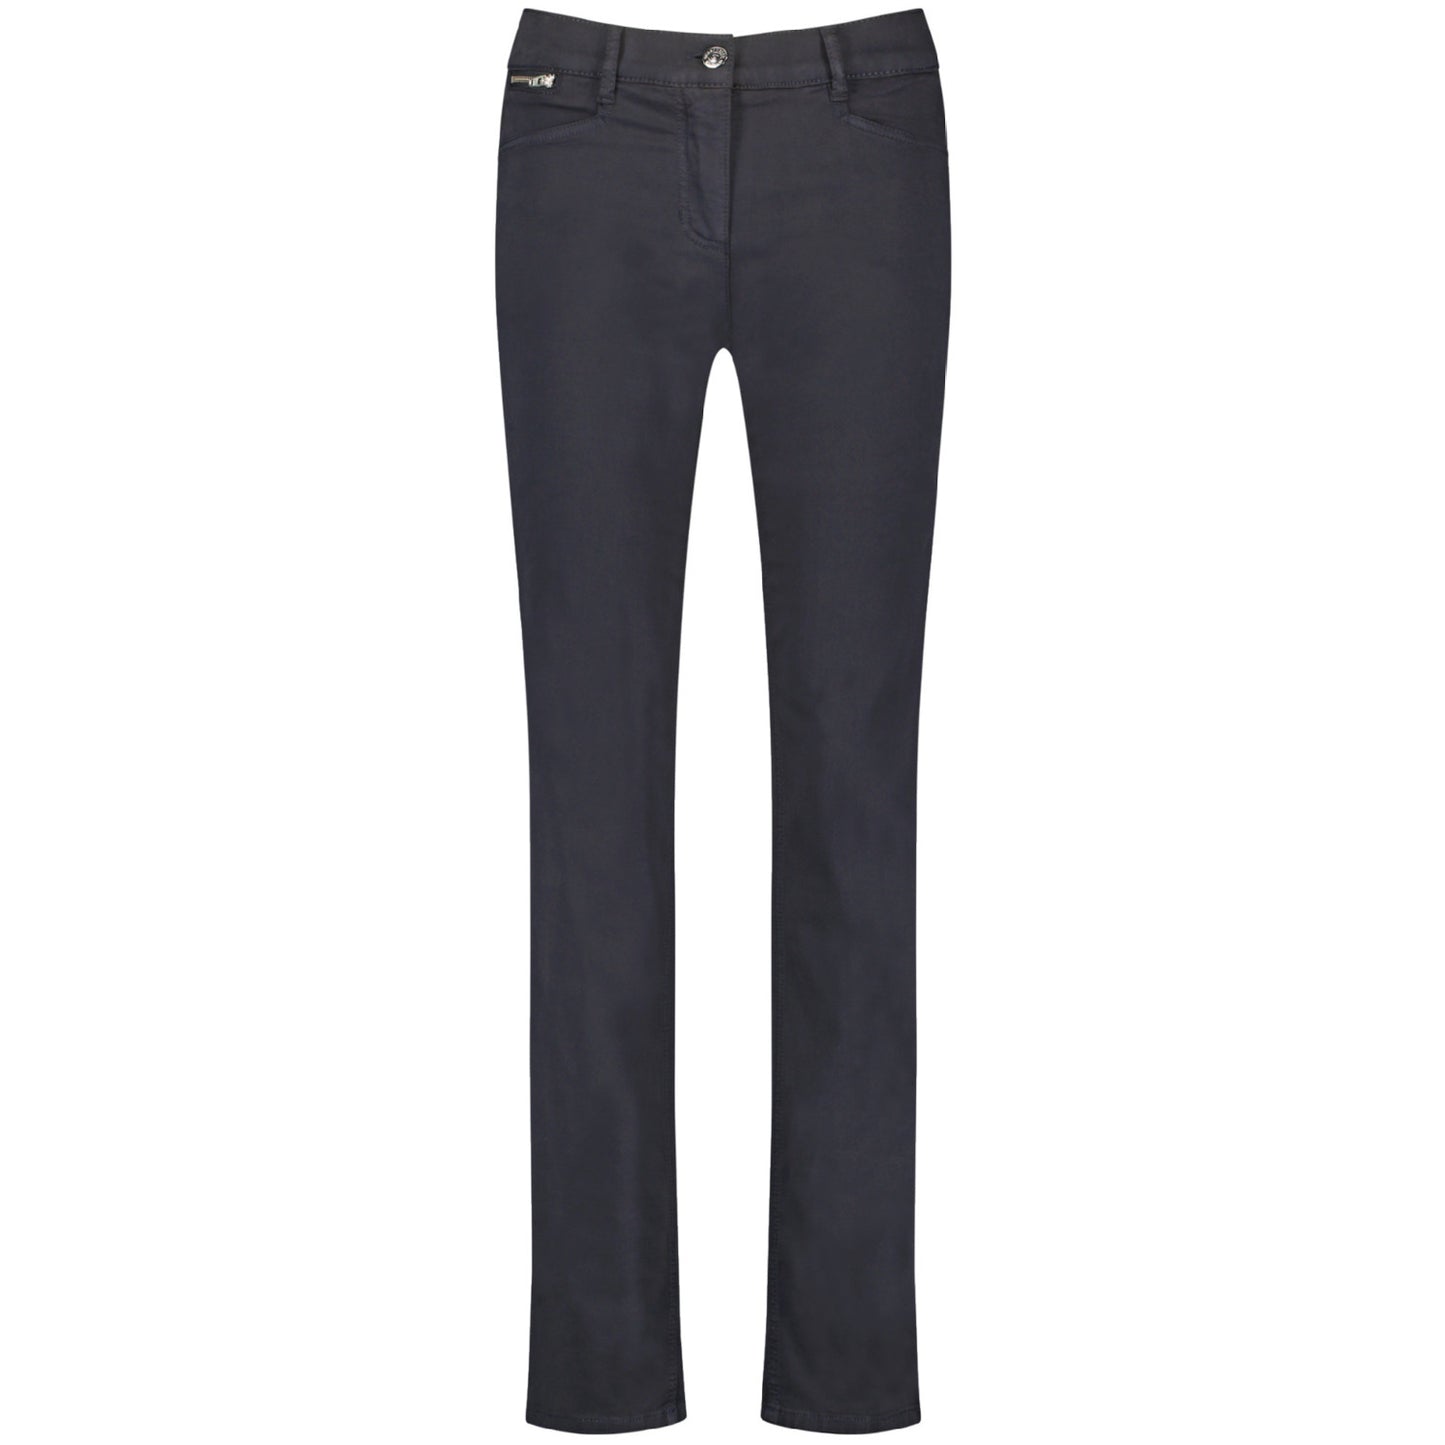 Gerry Weber 522049 66312 80890 Navy Trousers